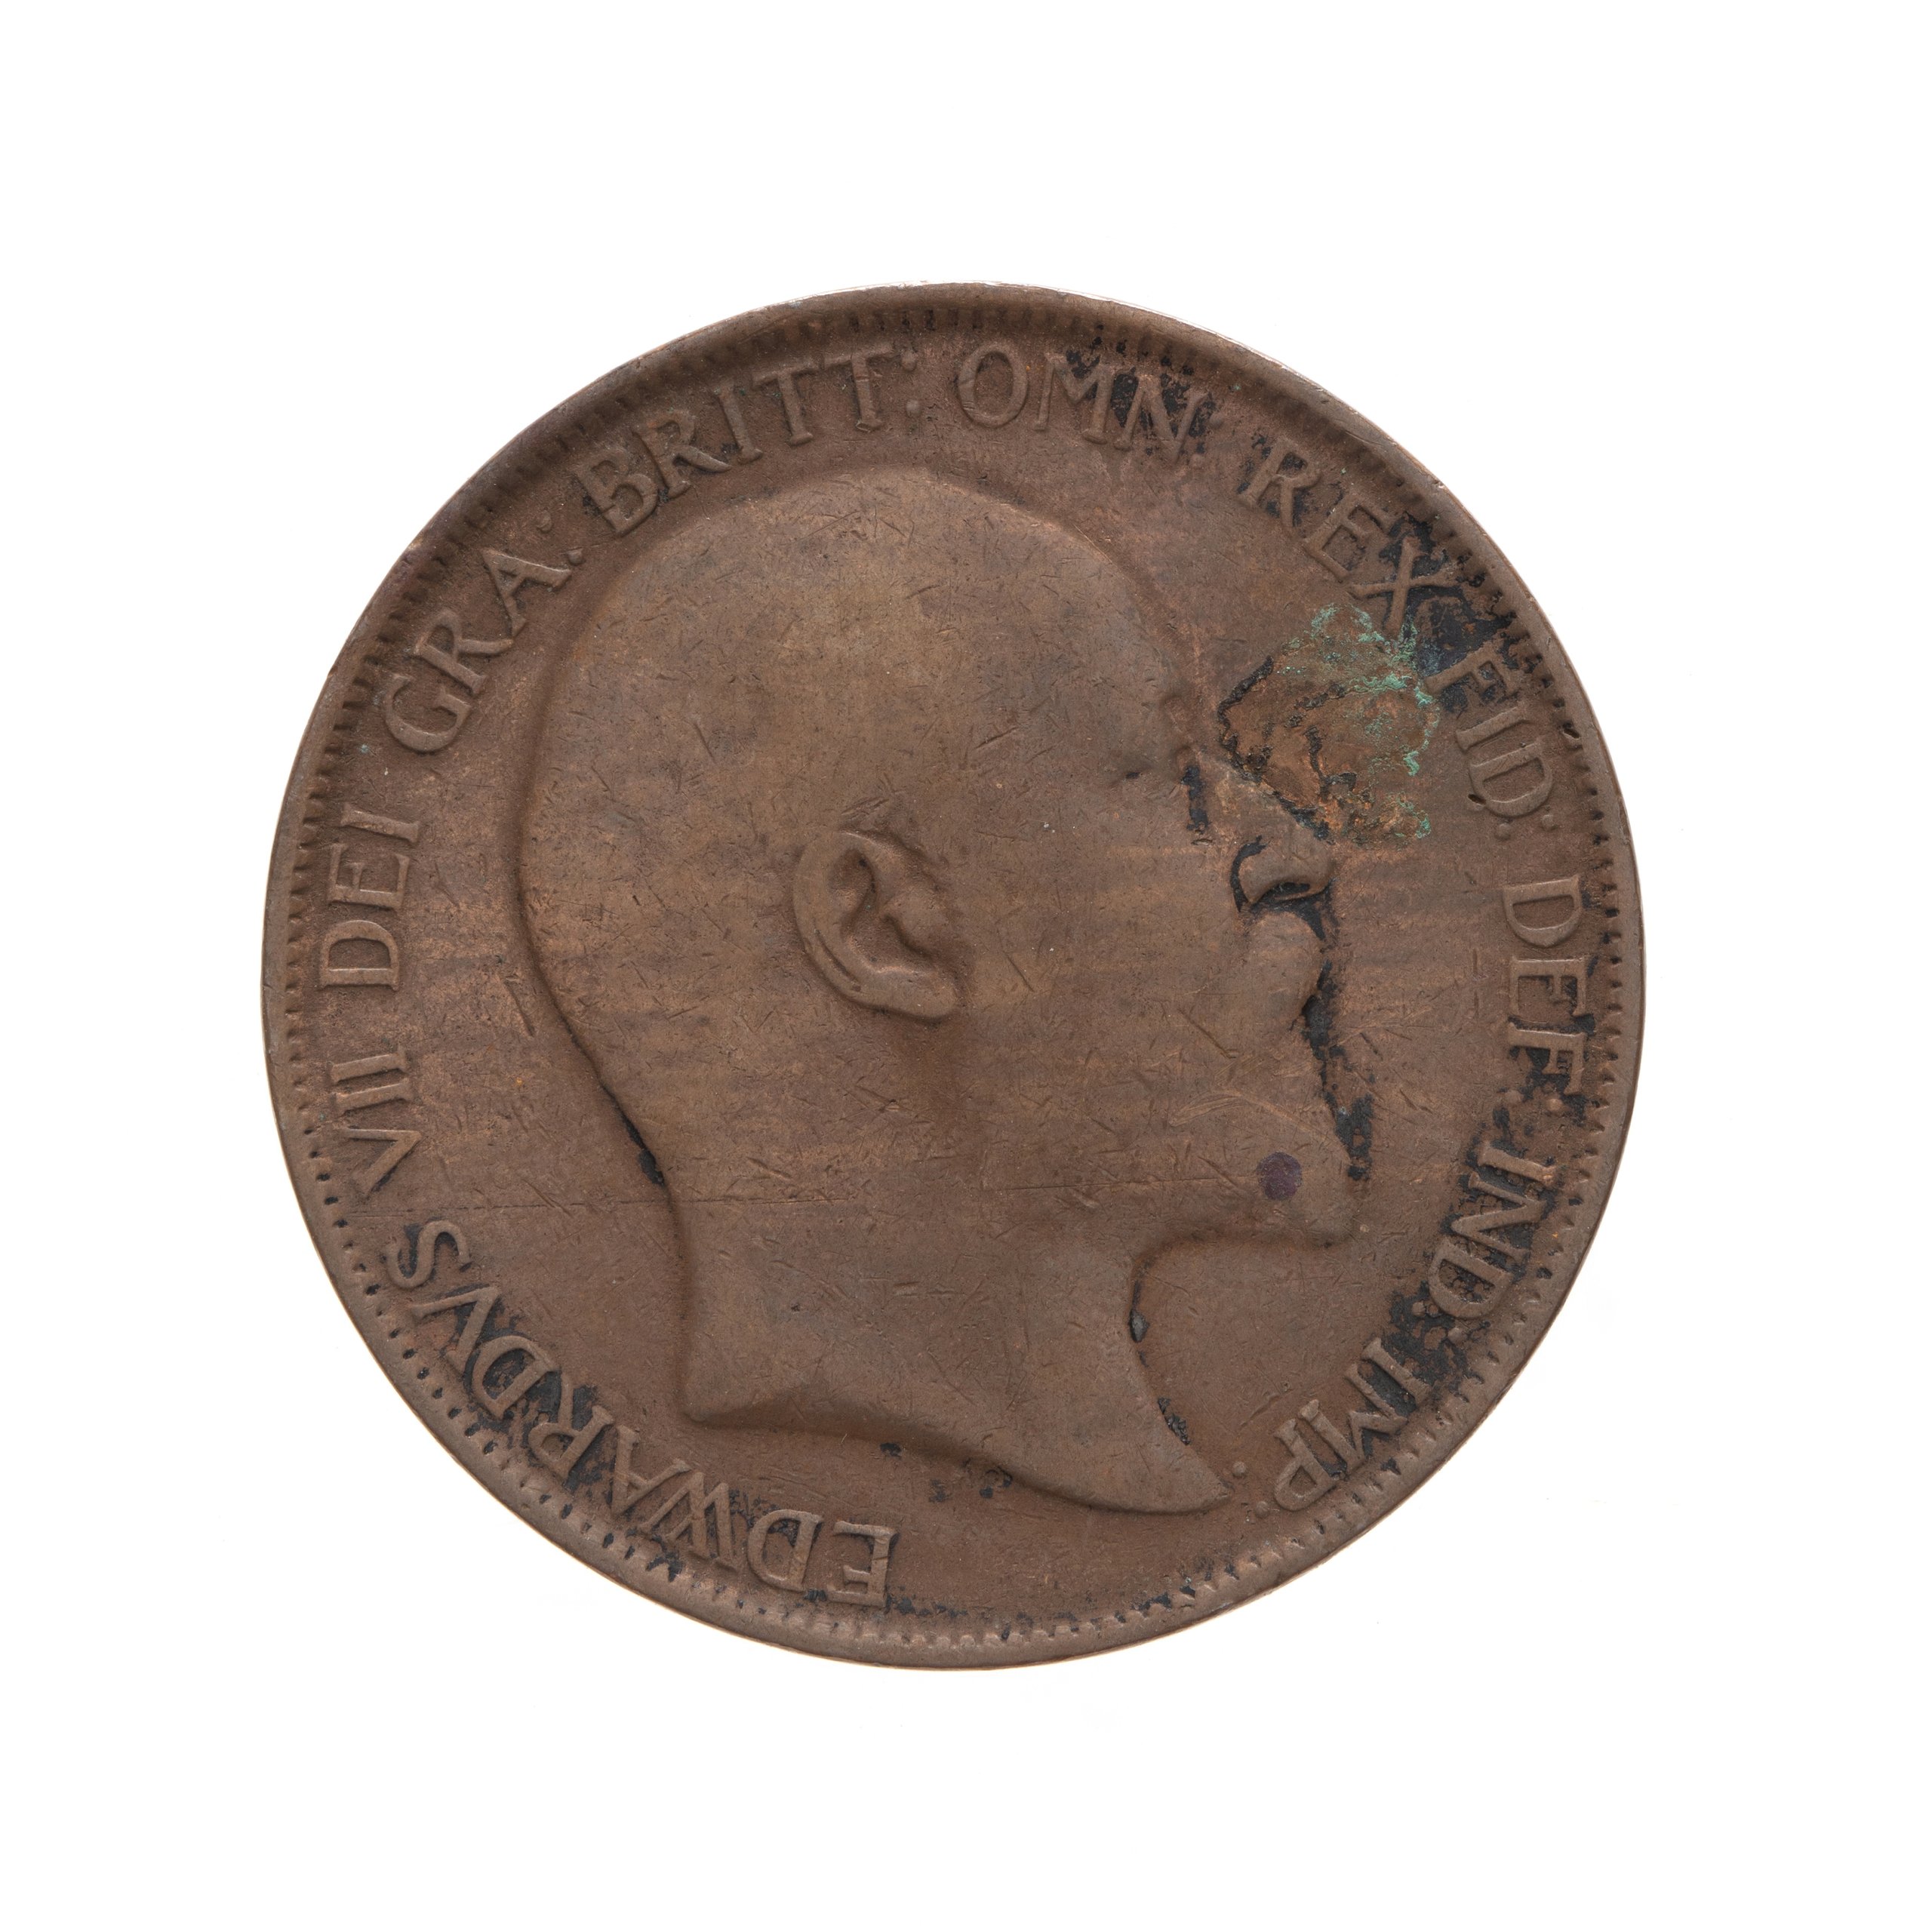 British Penny coin